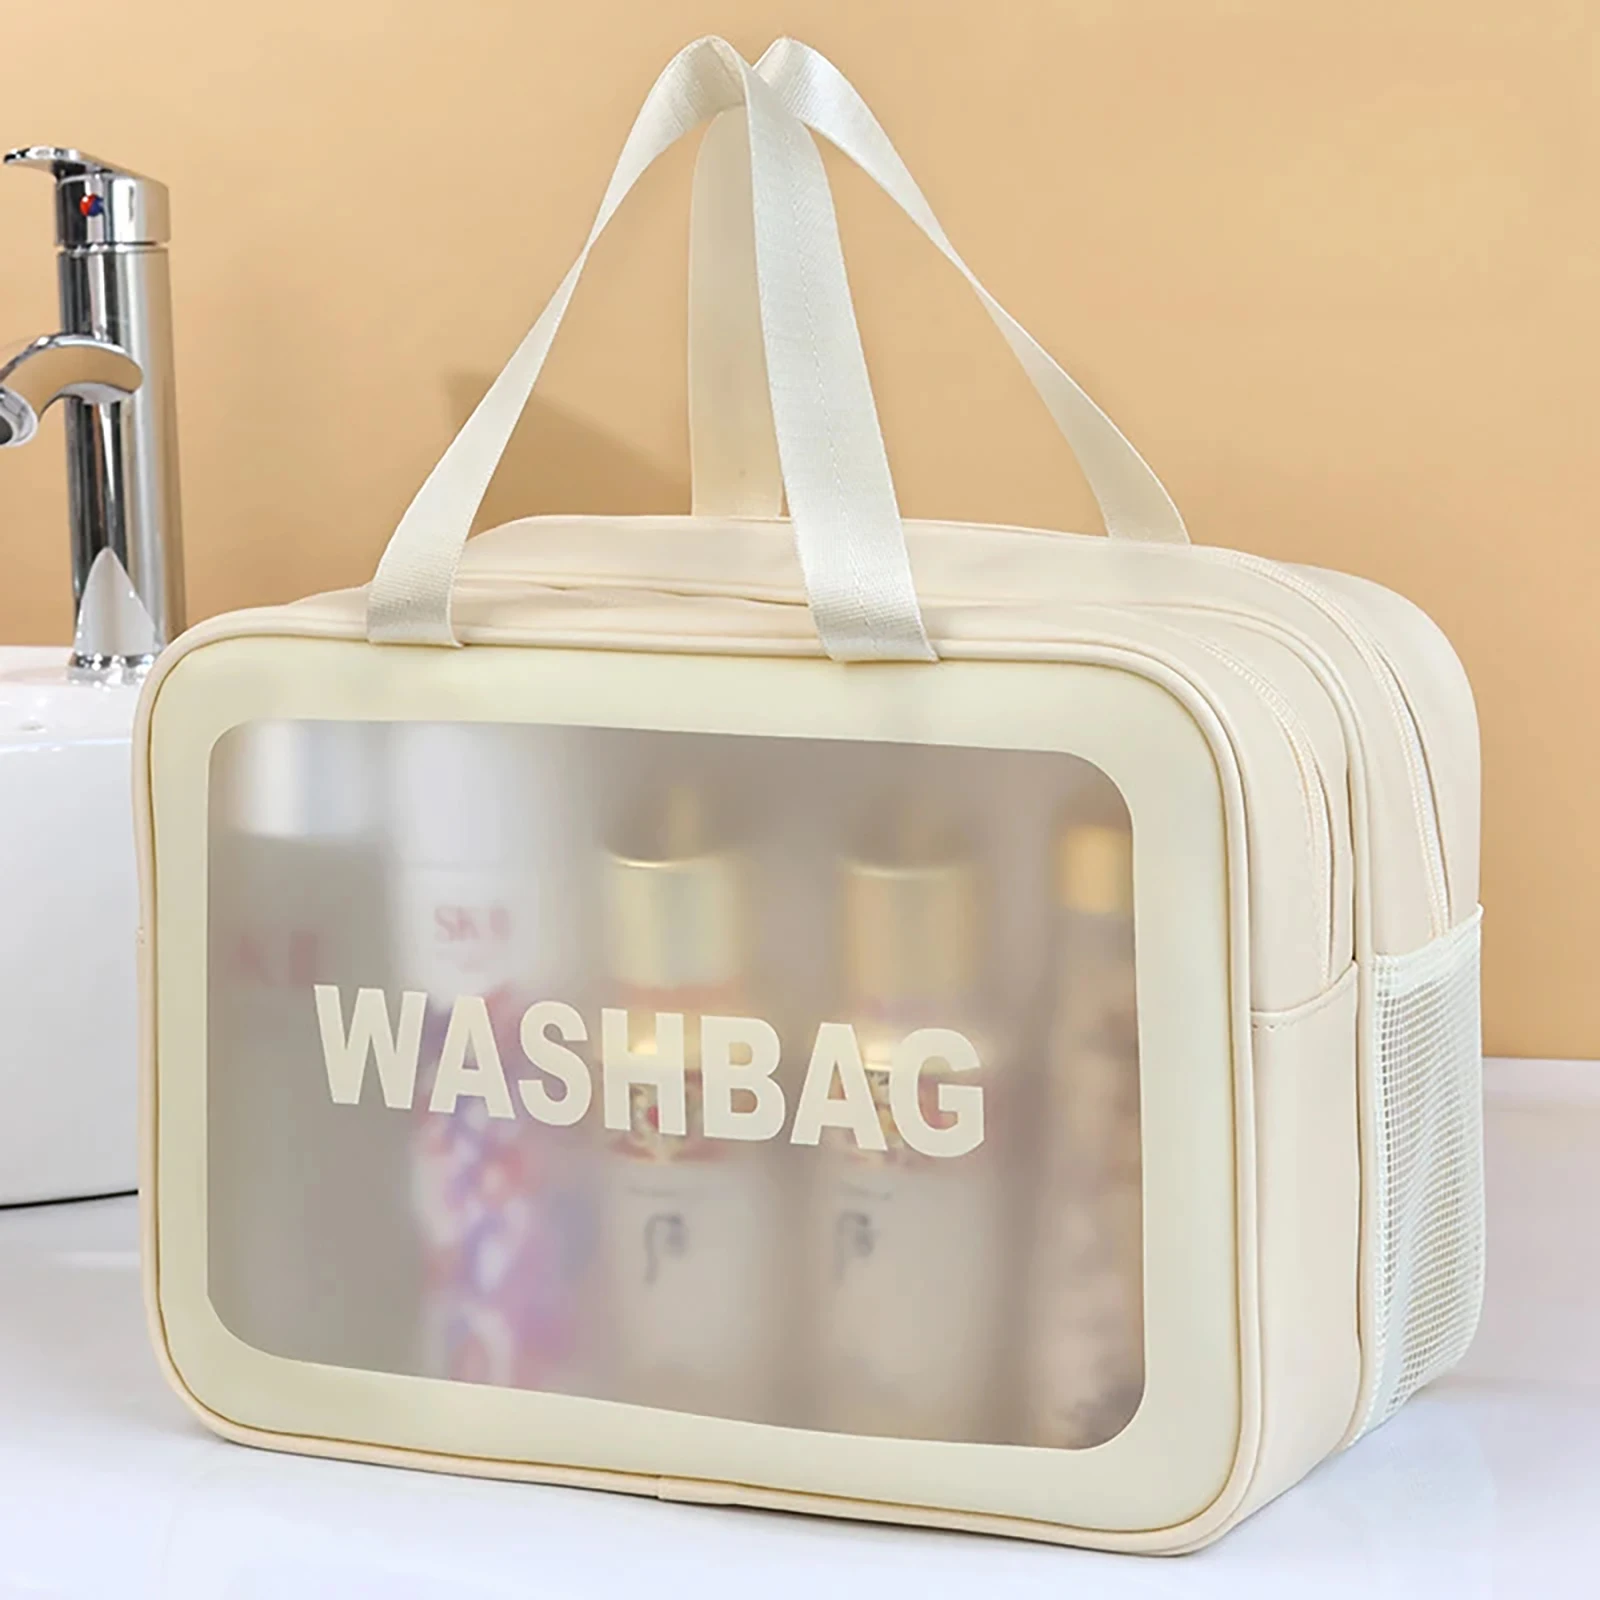 Bath Bag Dry-Wet Separation Partition Toiletry Bag Portable PVC Double-Layer Cosmetic Bag for Travel, Beach, Pool Bathing